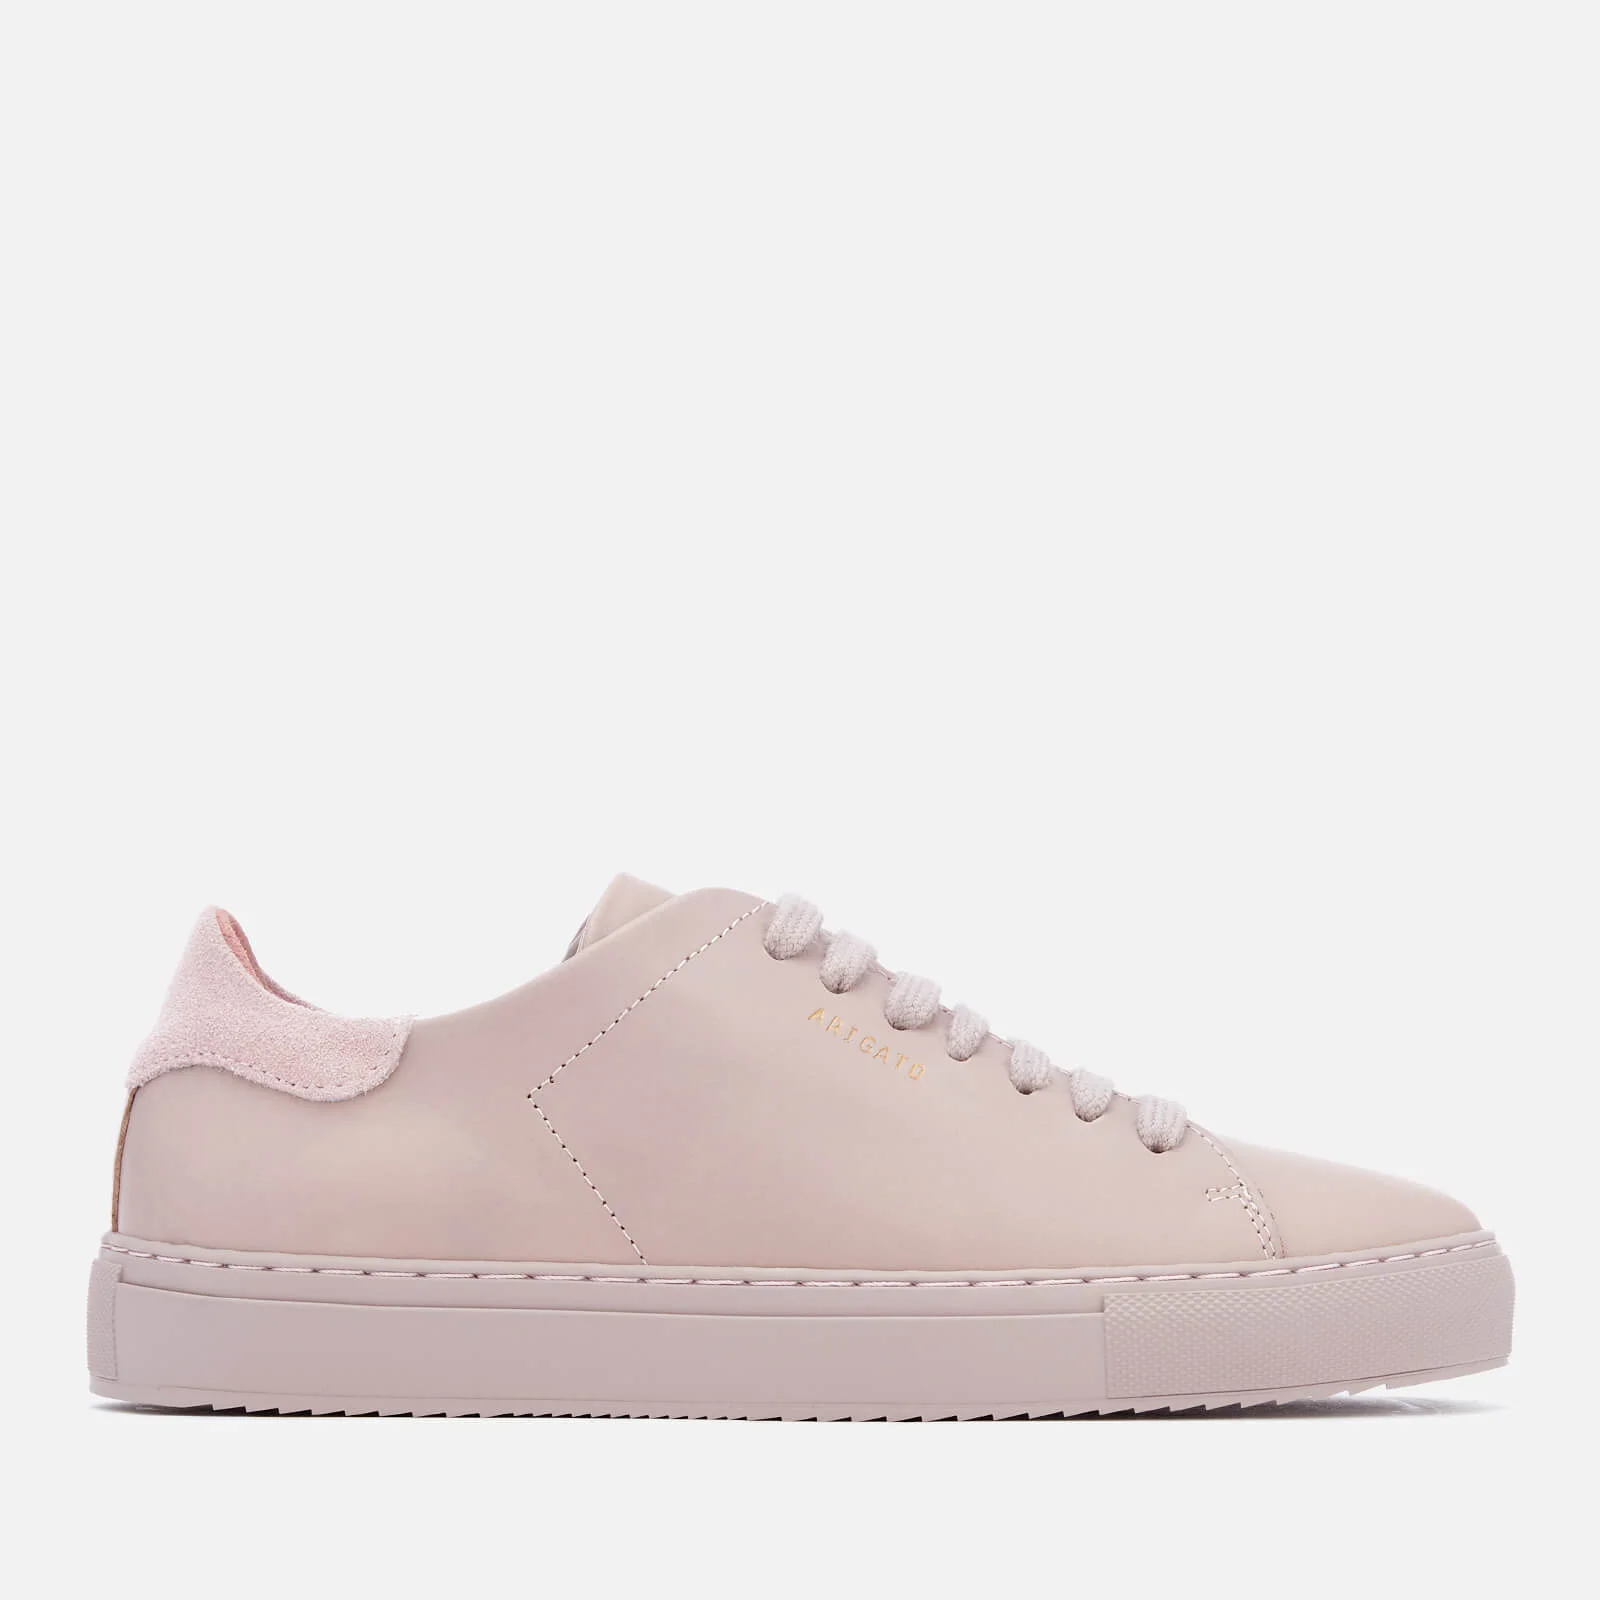 Axel Arigato Women's Clean 90 Leather Trainers - Pale Lilac Image 1